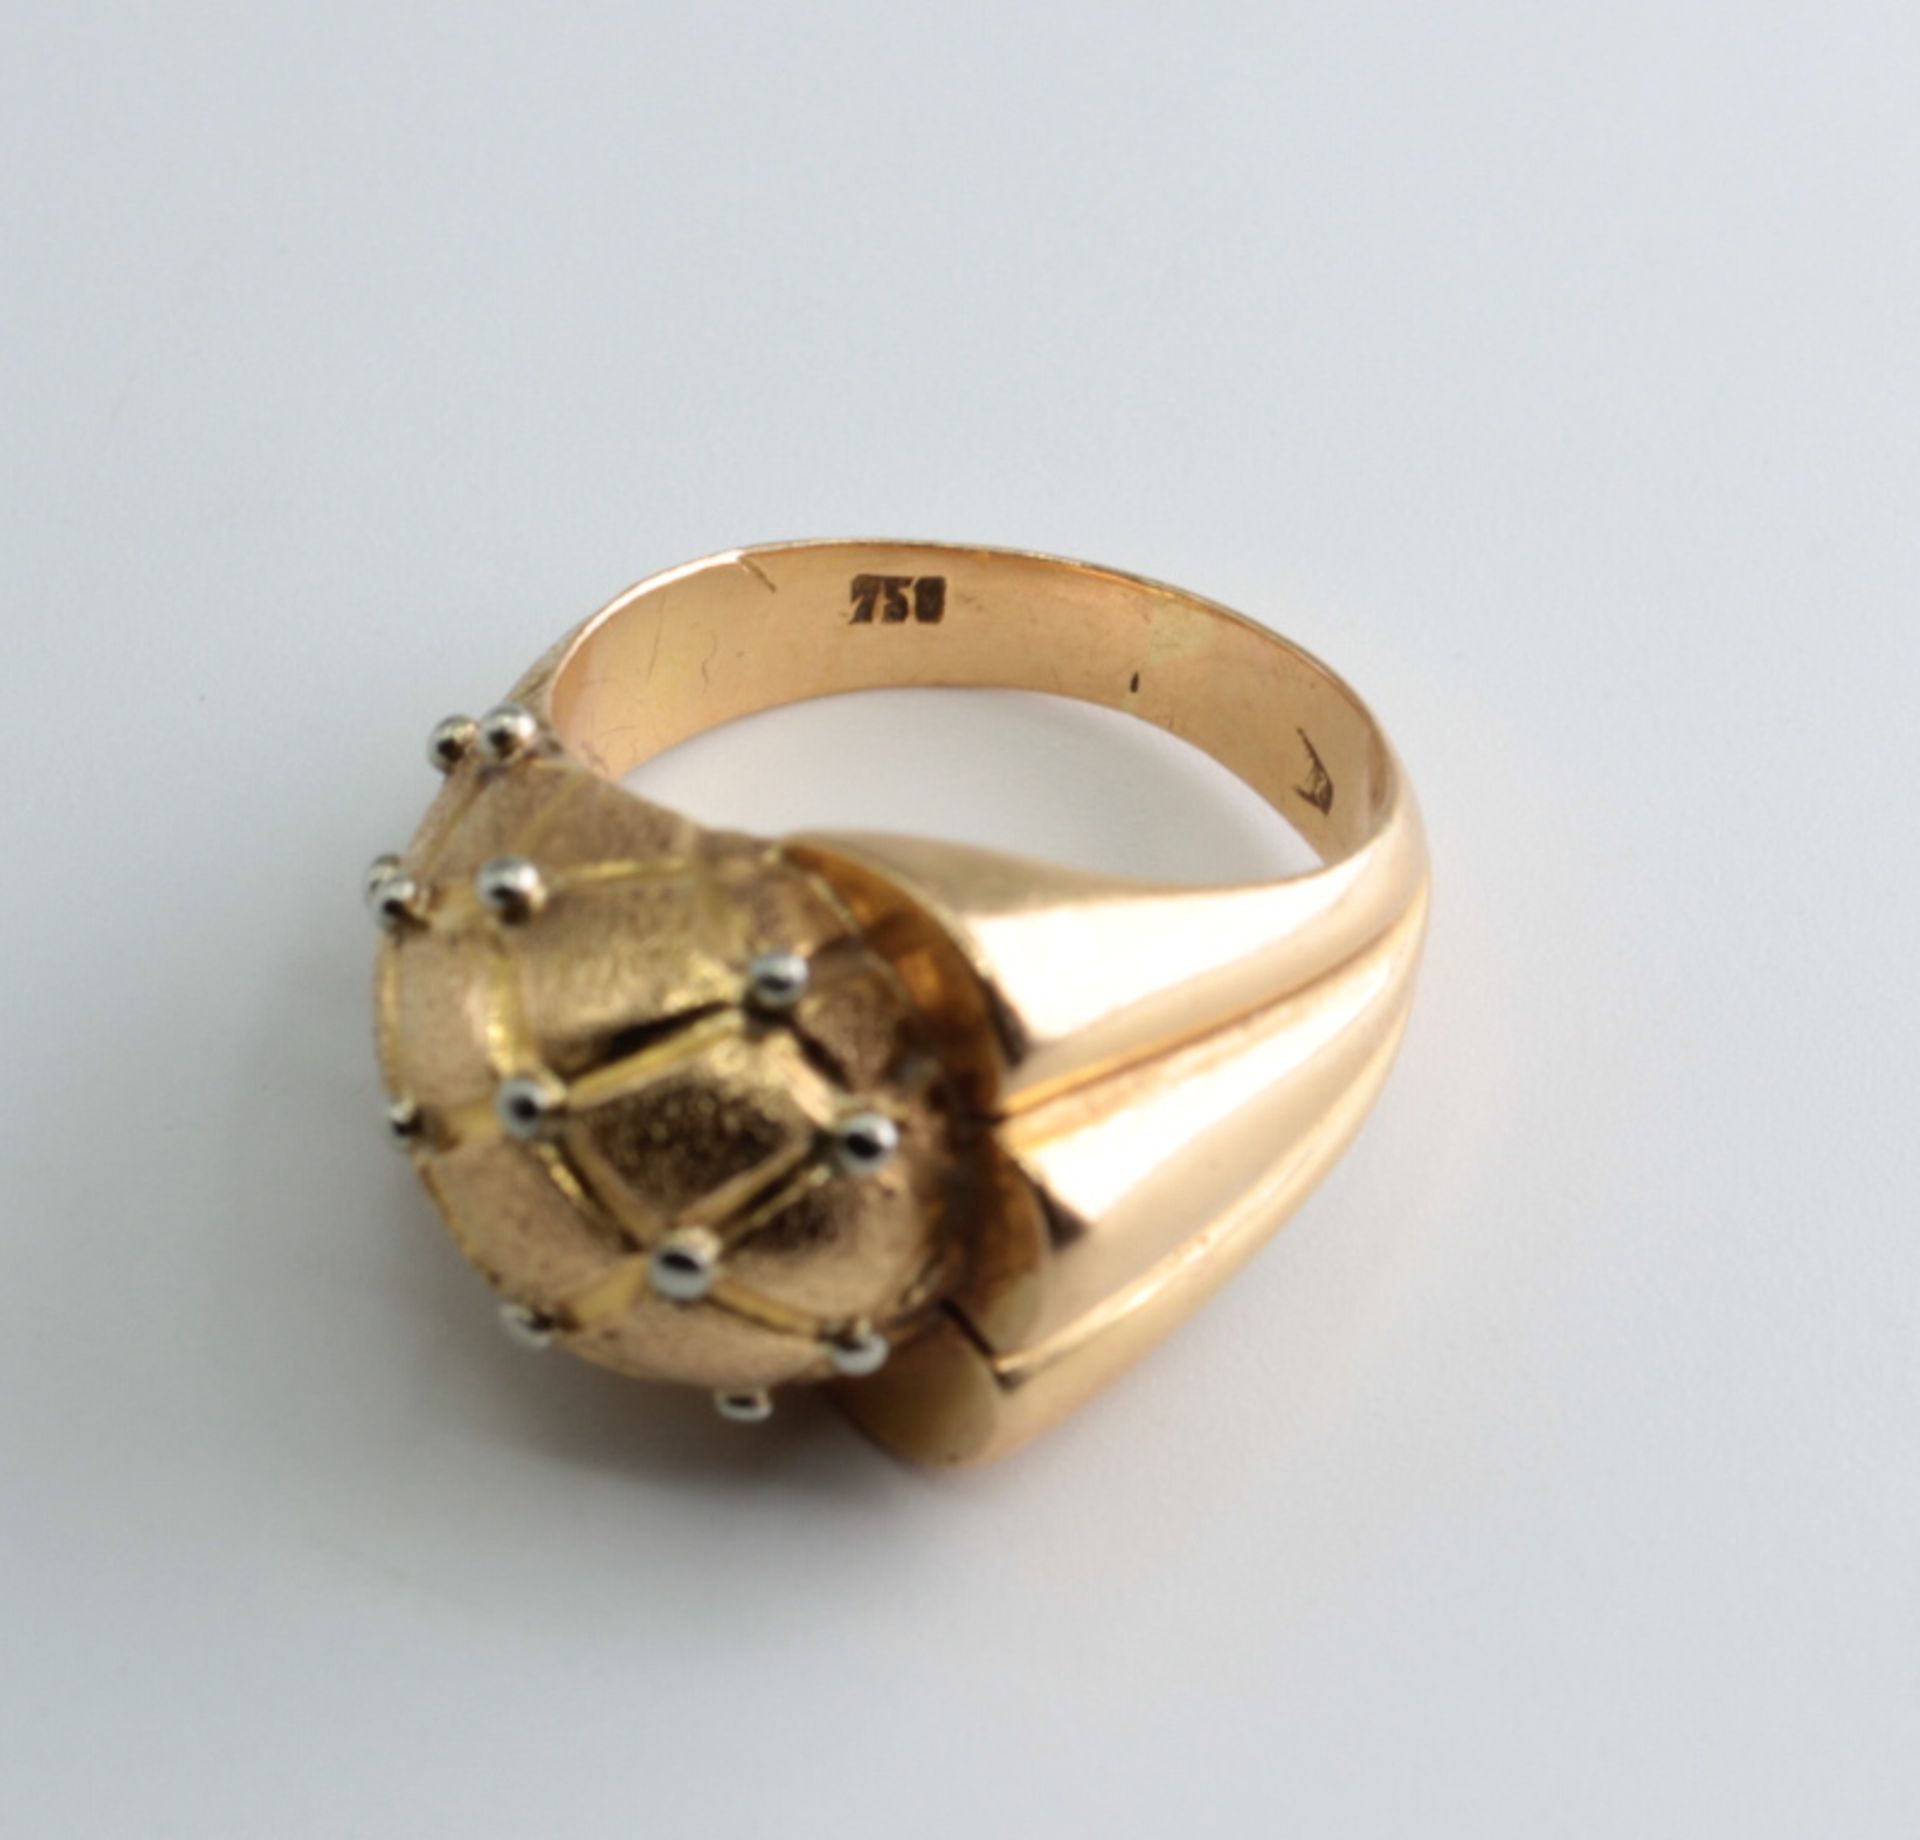 Designer ring, 750 yellow gold with white gold - Image 2 of 4